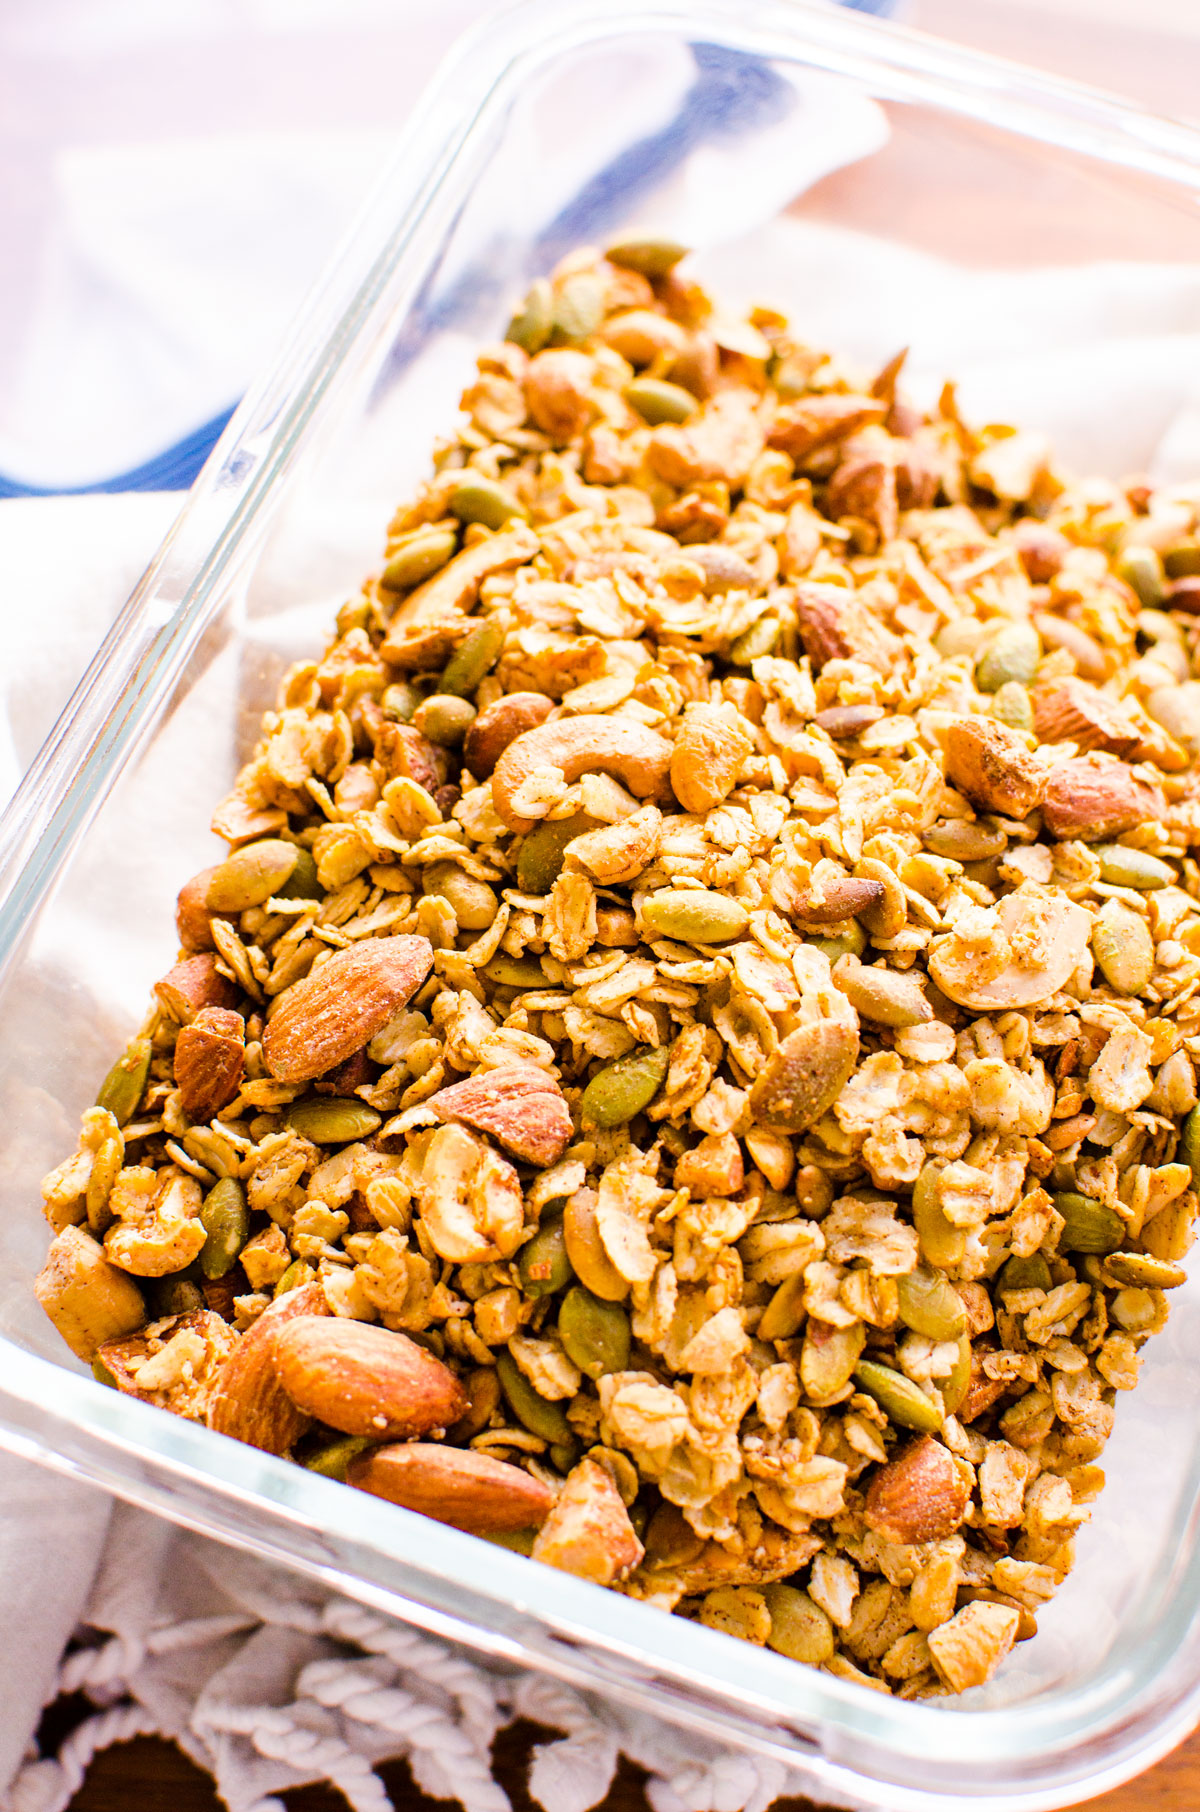 Healthy granola with nuts and seeds in glass container.